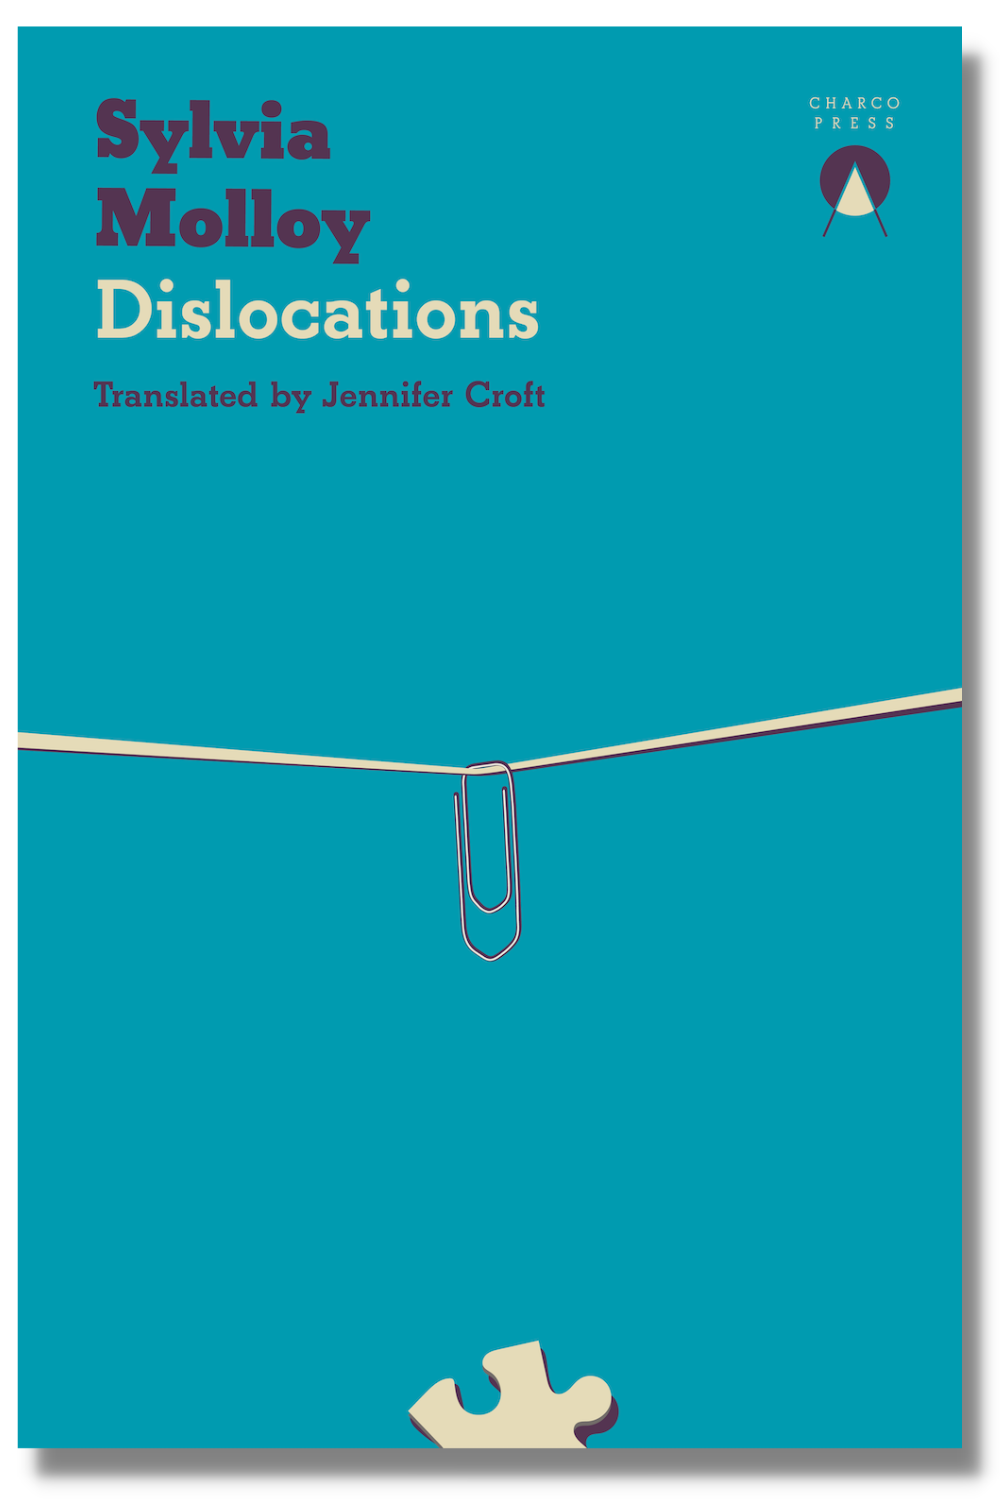 The cover of "Dislocations"